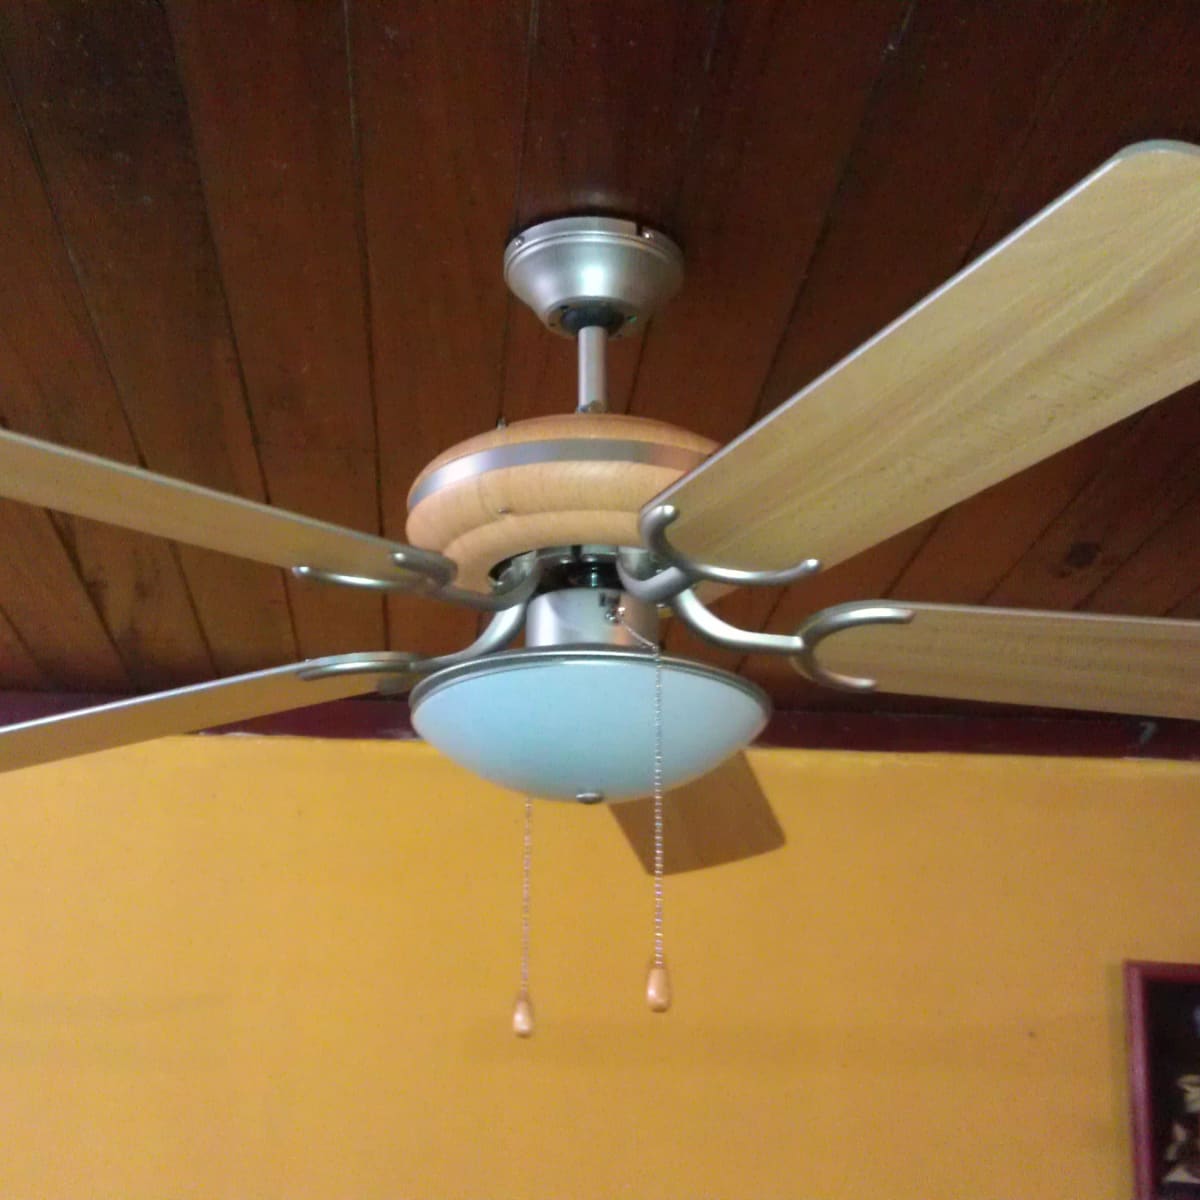 How To Install A Ceiling Fan With Light Dengarden - How To Turn On Ceiling Fan Light